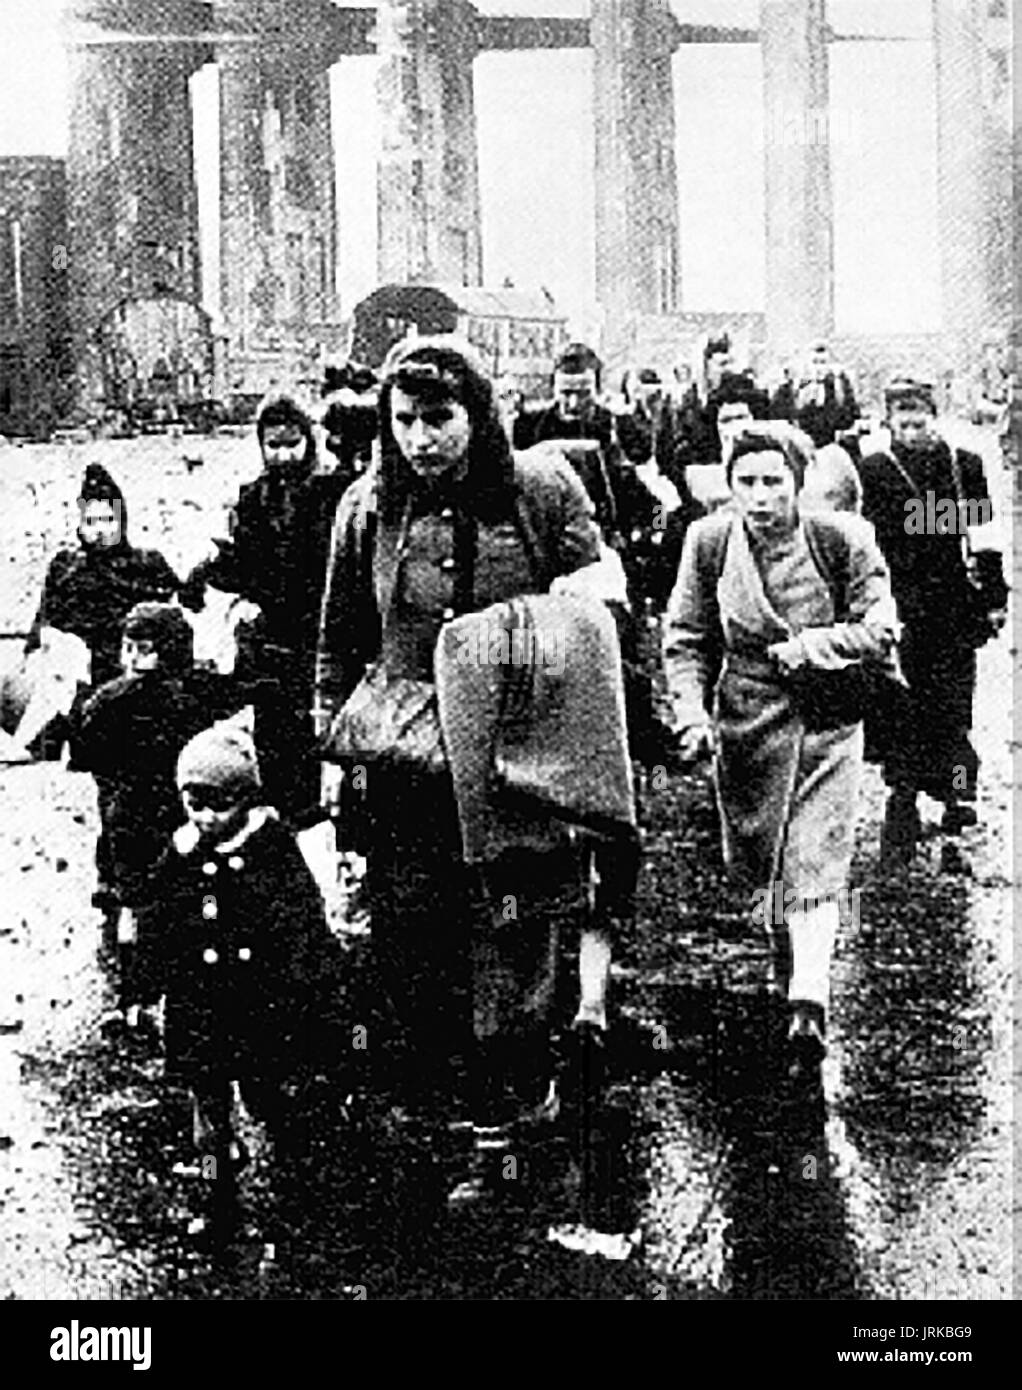 1945 following the defeat of Germany by allied forces, German refugee women and children walk through the ruins of Berlin. Stock Photo